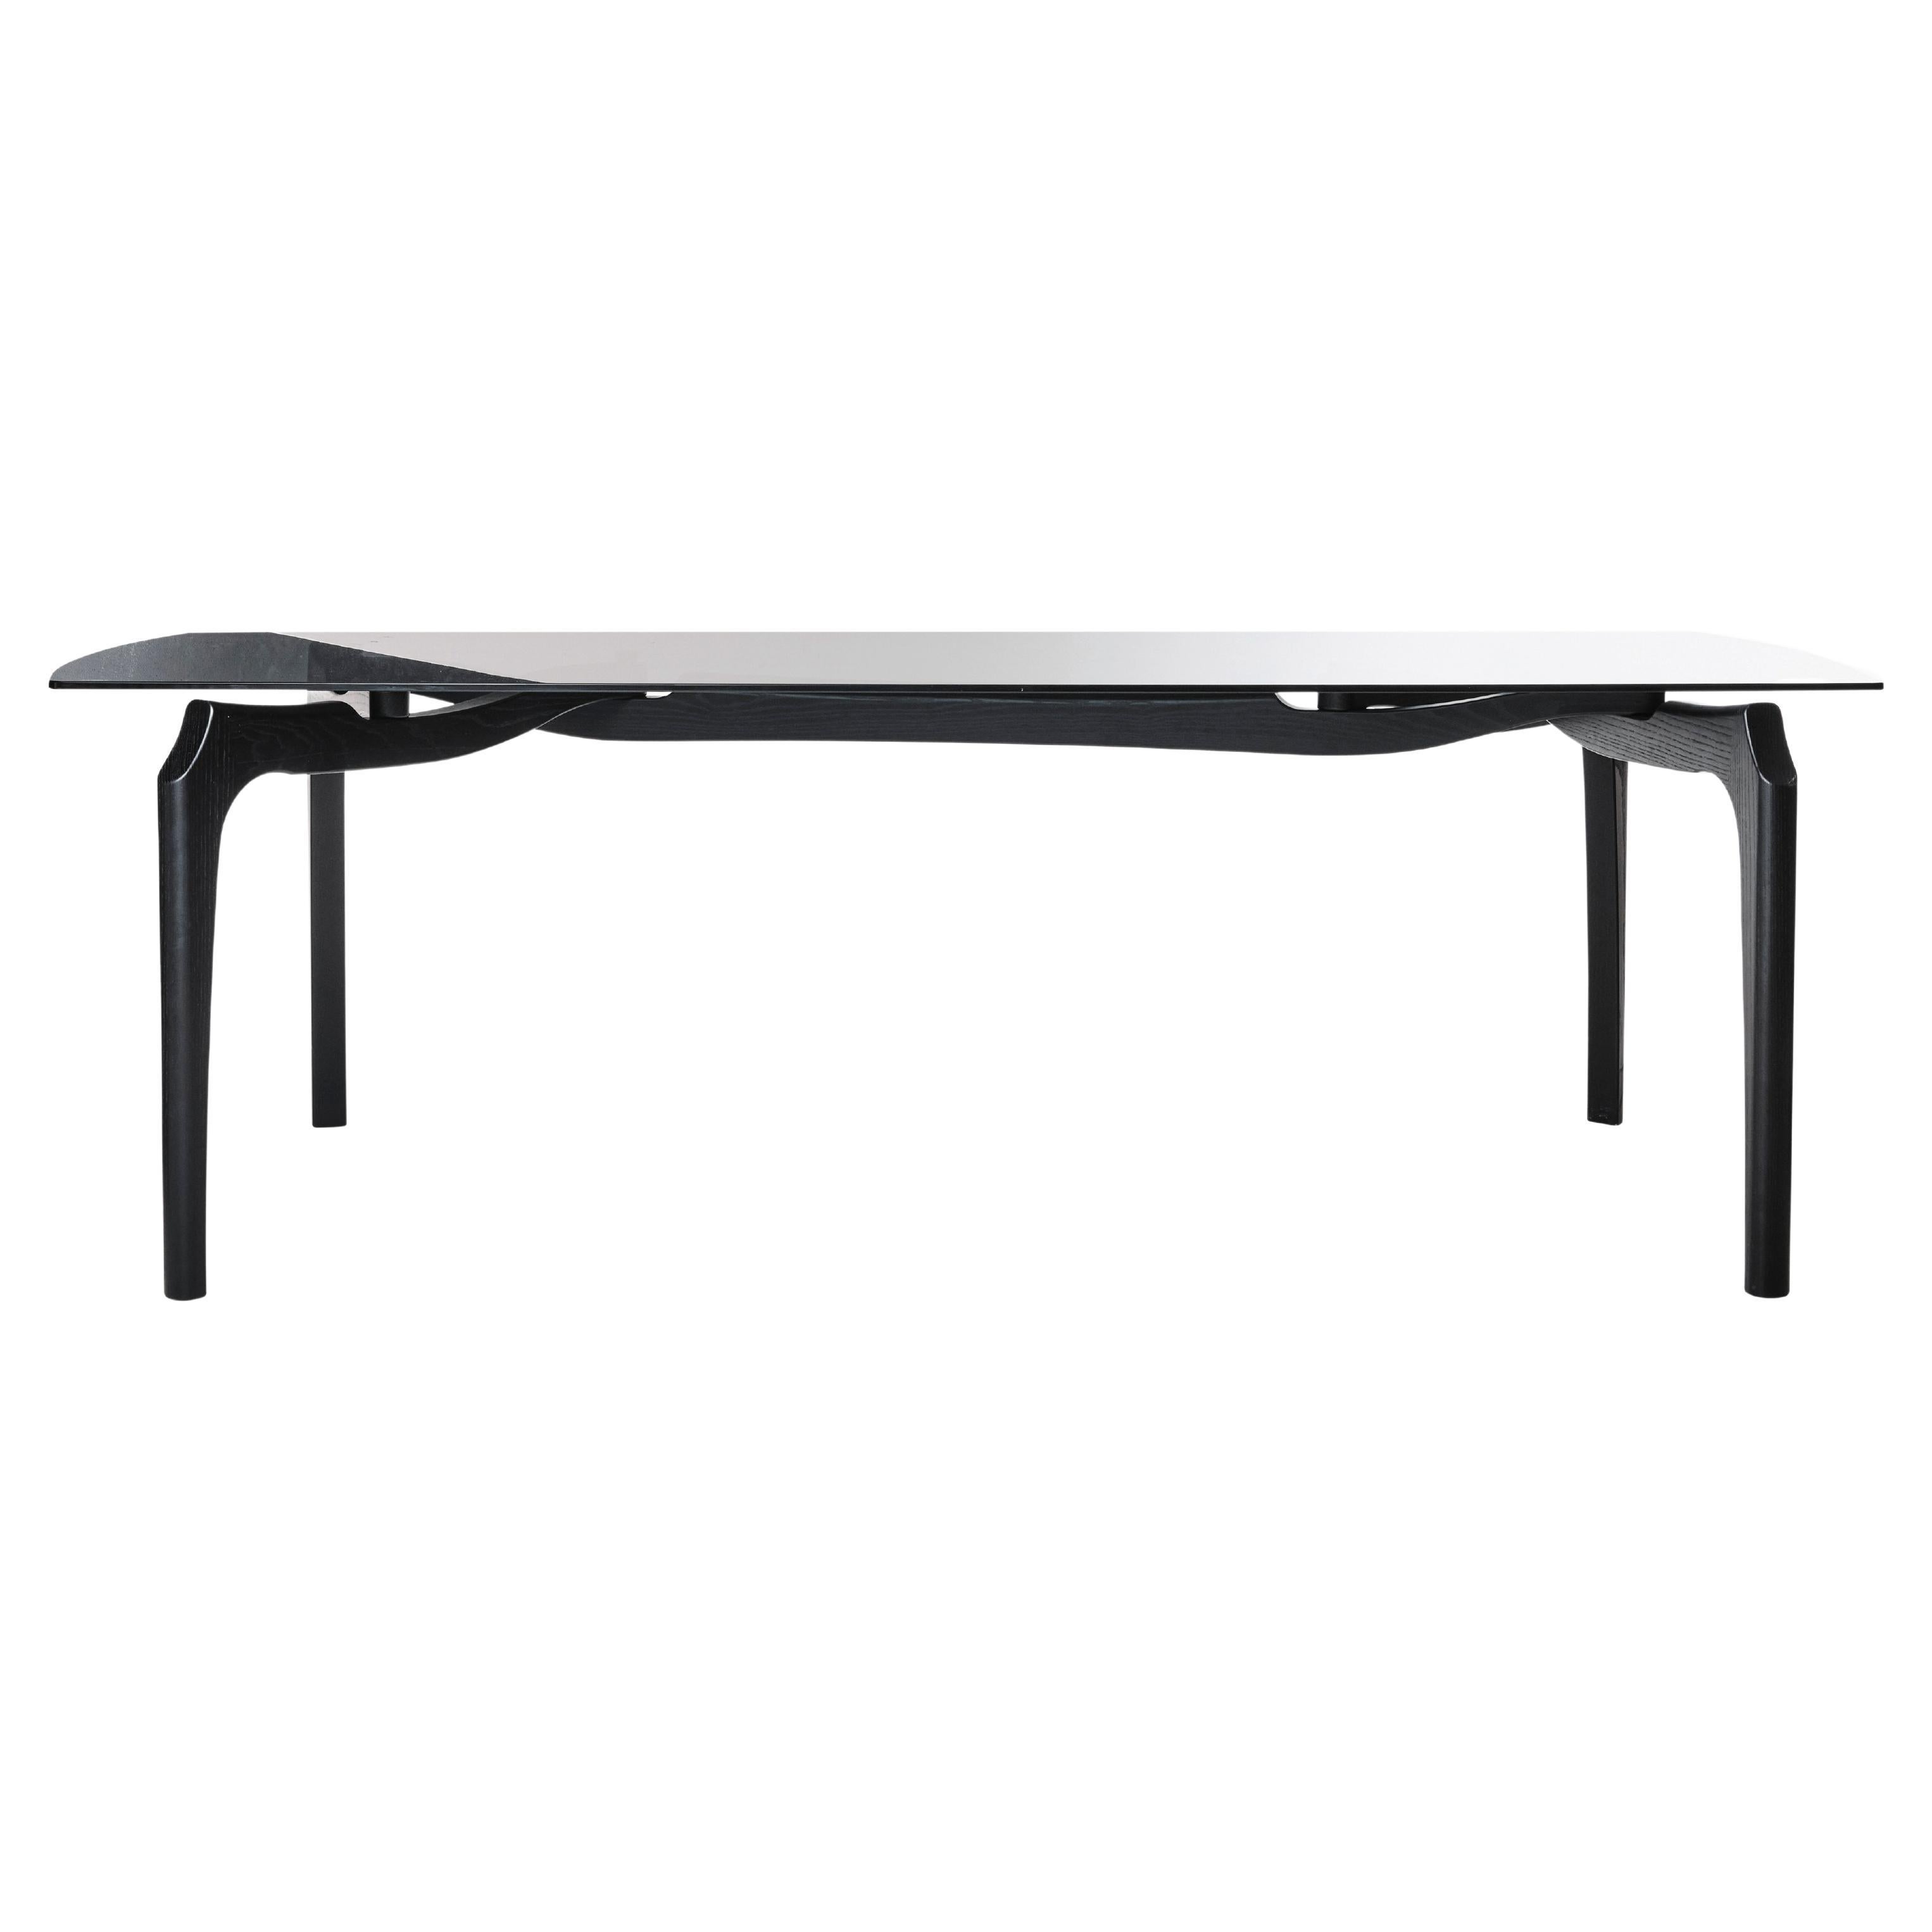 Rectangular dining table "Carlina" by Oscar Tusquets, black ash, smoked glass For Sale